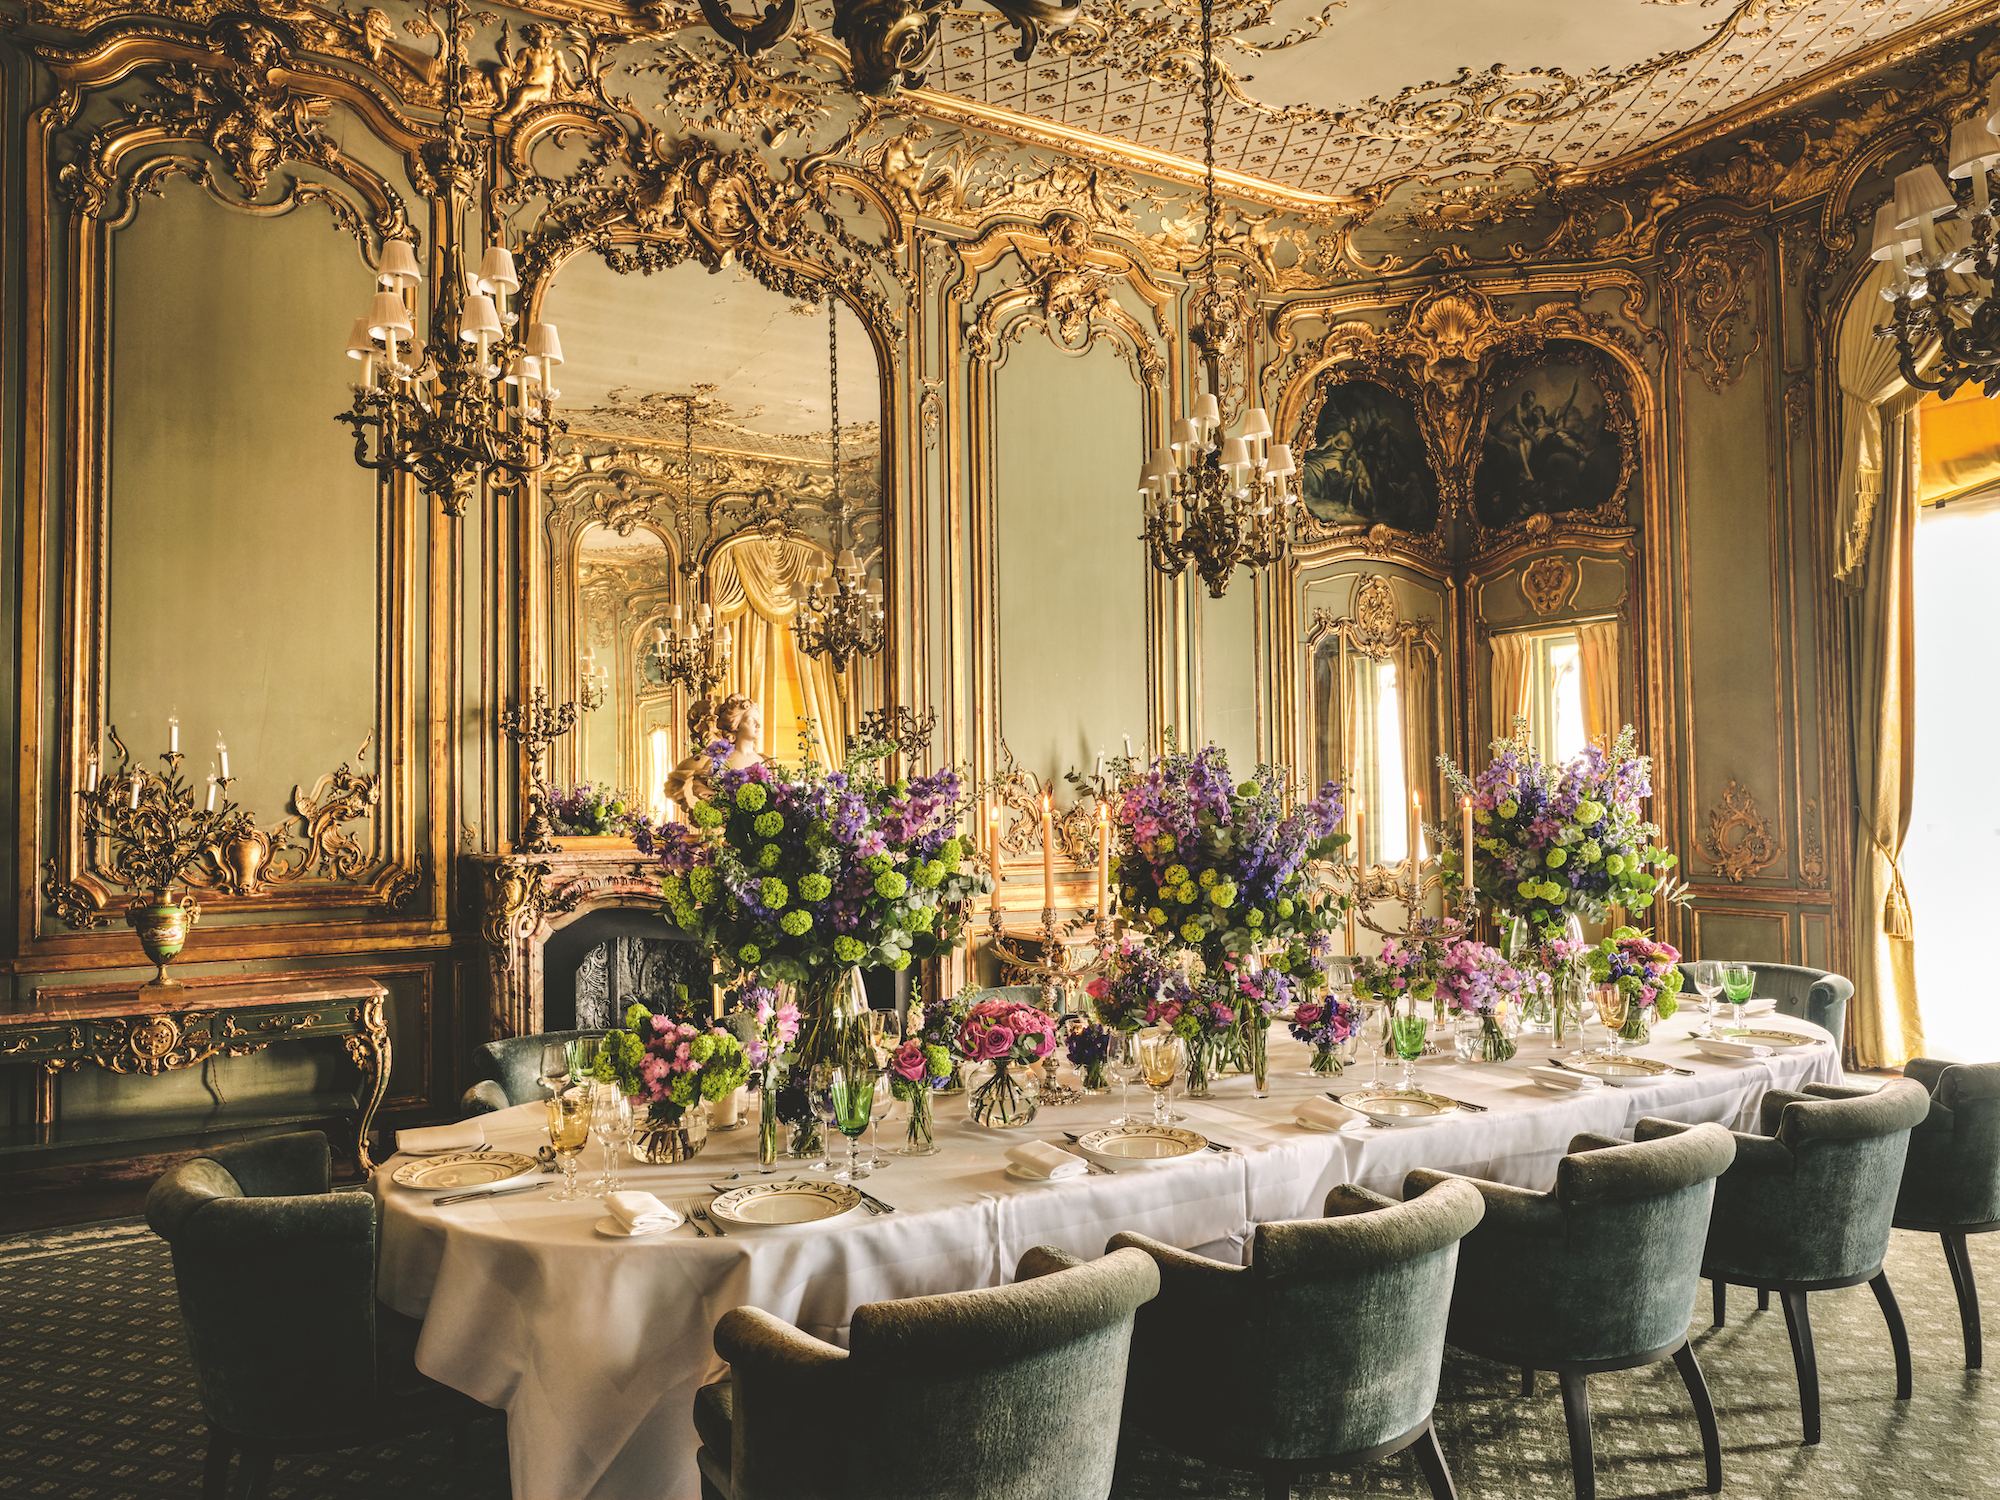 Dining room in Cliveden, with tablescaping by Jane Churchill, from Jane Churchill’s ‘Entertaining Lives’ (Photo: Andrew Montgomery)